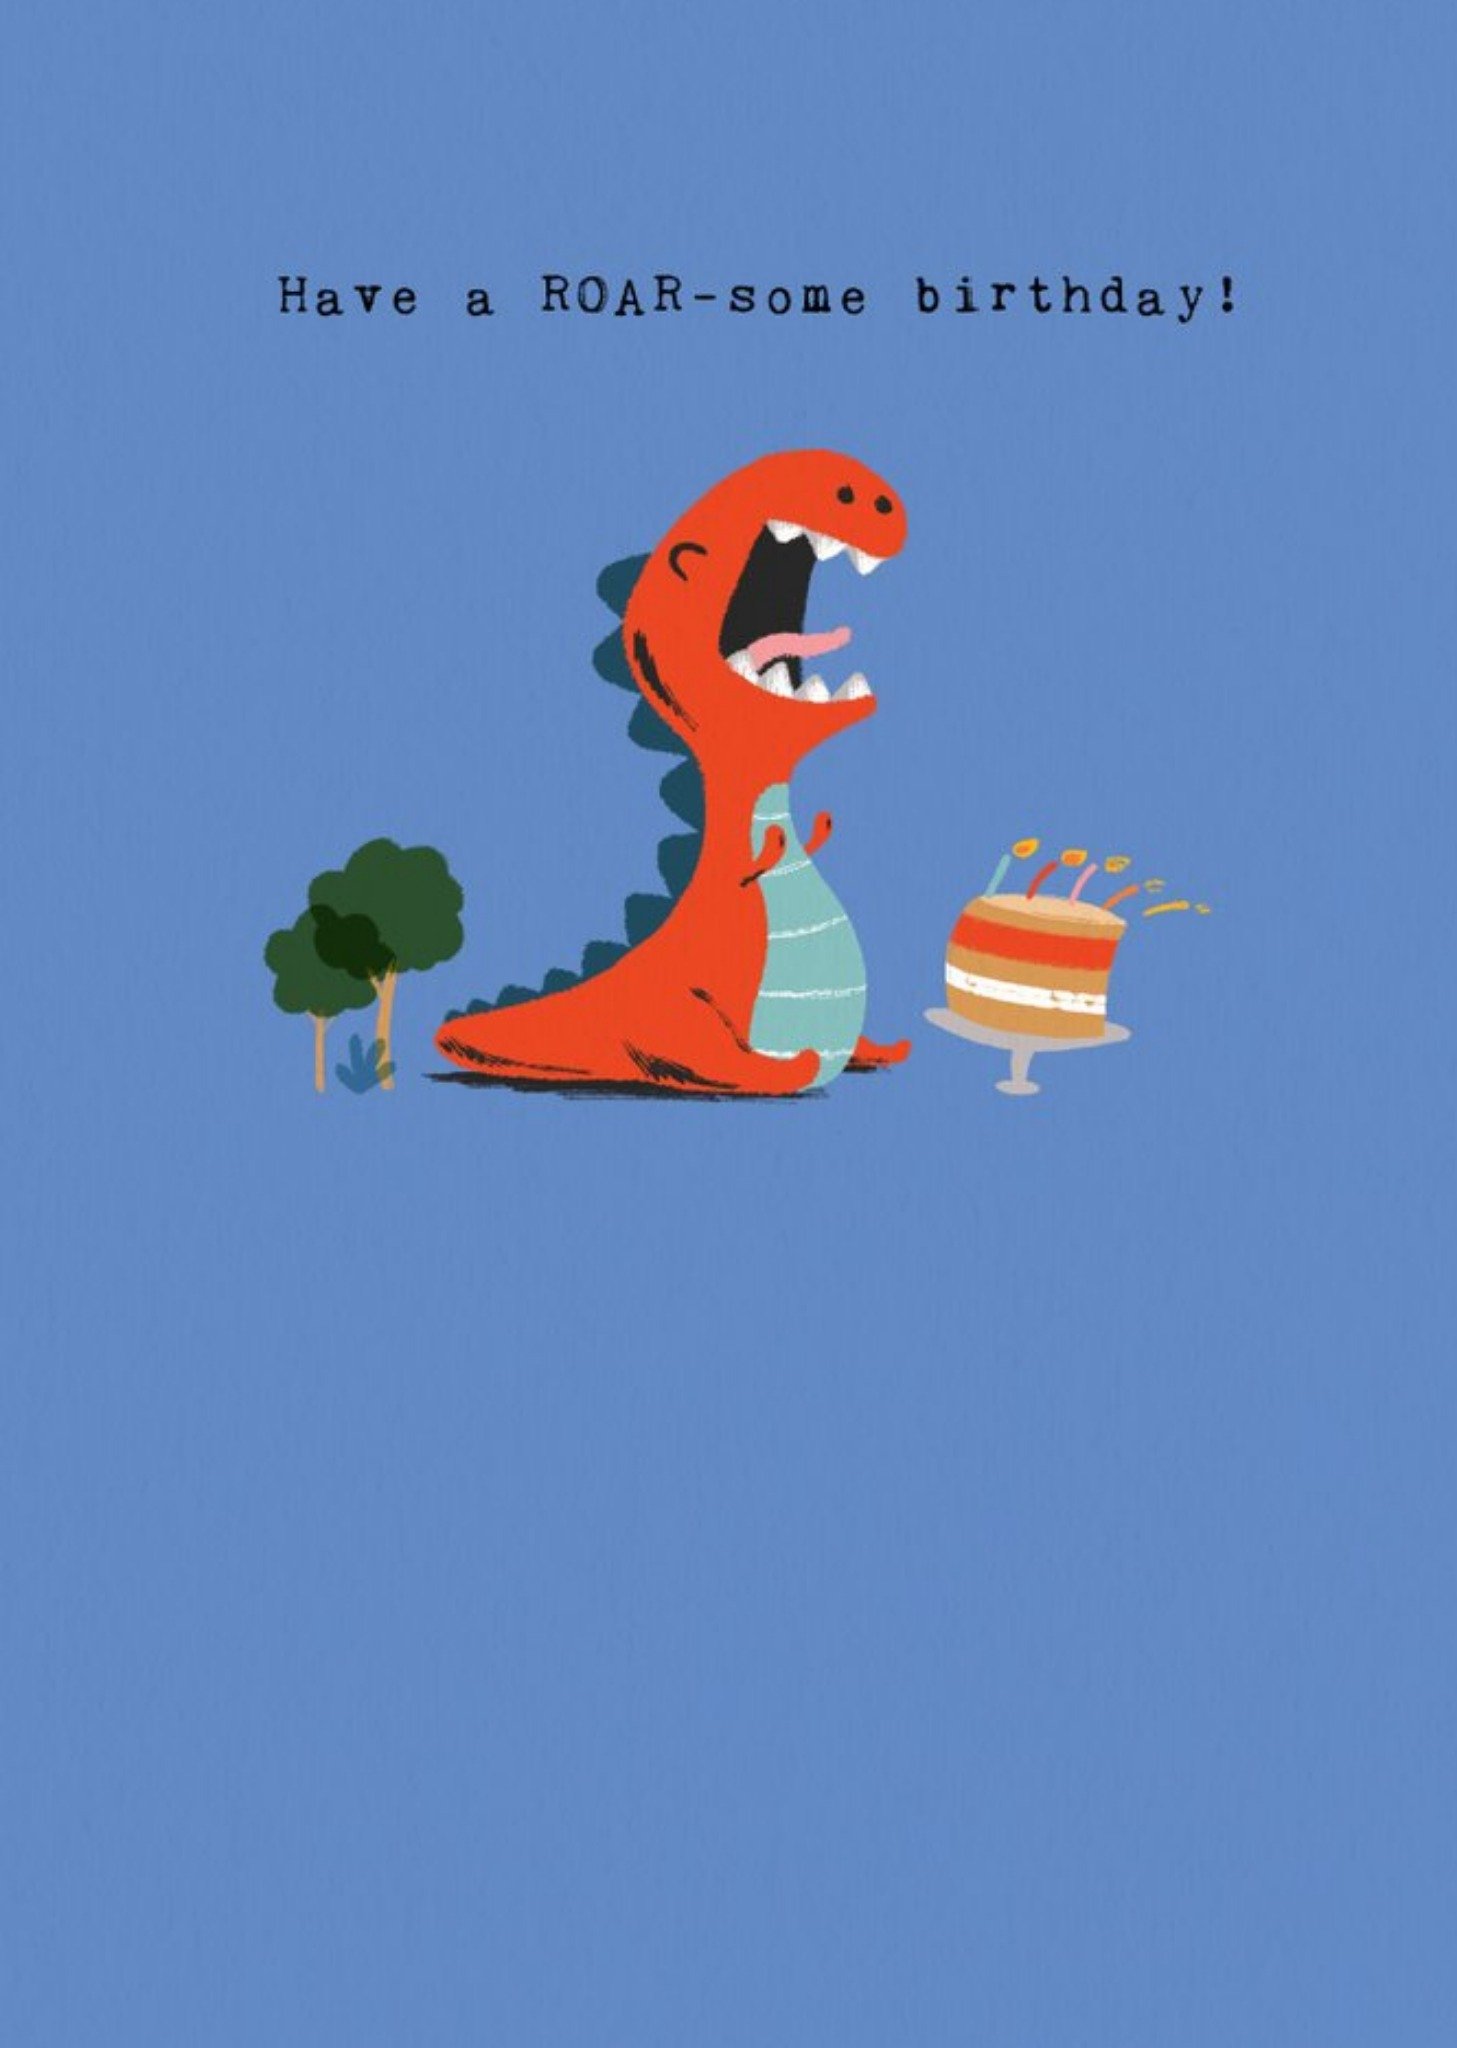 Moonpig Cute Illustration Of A Dinosaur Have A Roar-Some Birthday Card, Large